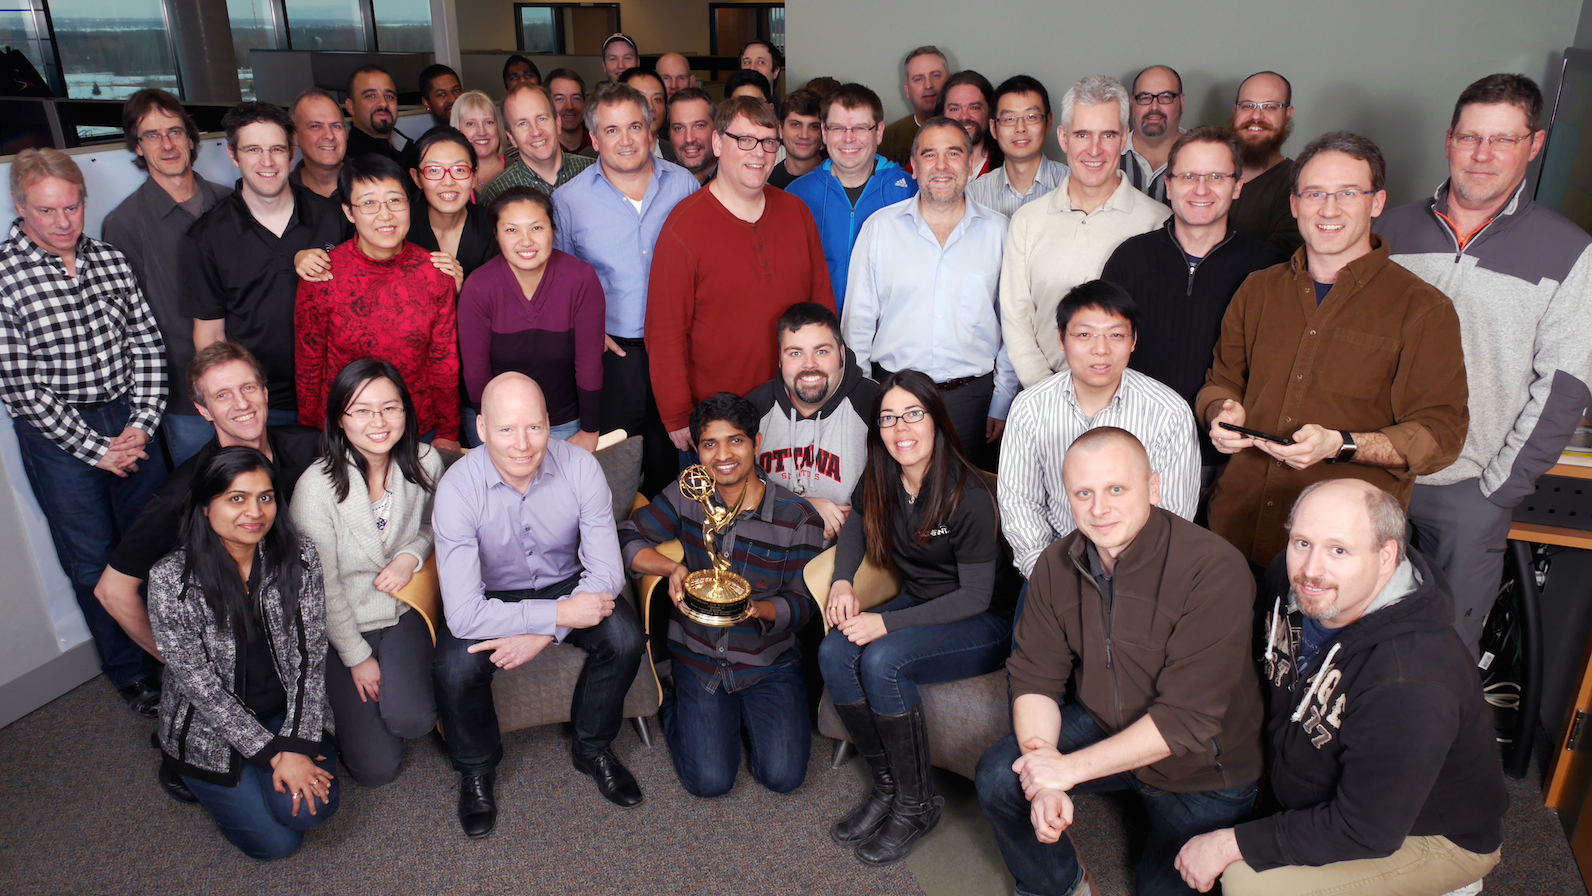 A big group of people in an office in Ottawa. The man in the center is holding an Emmy award.